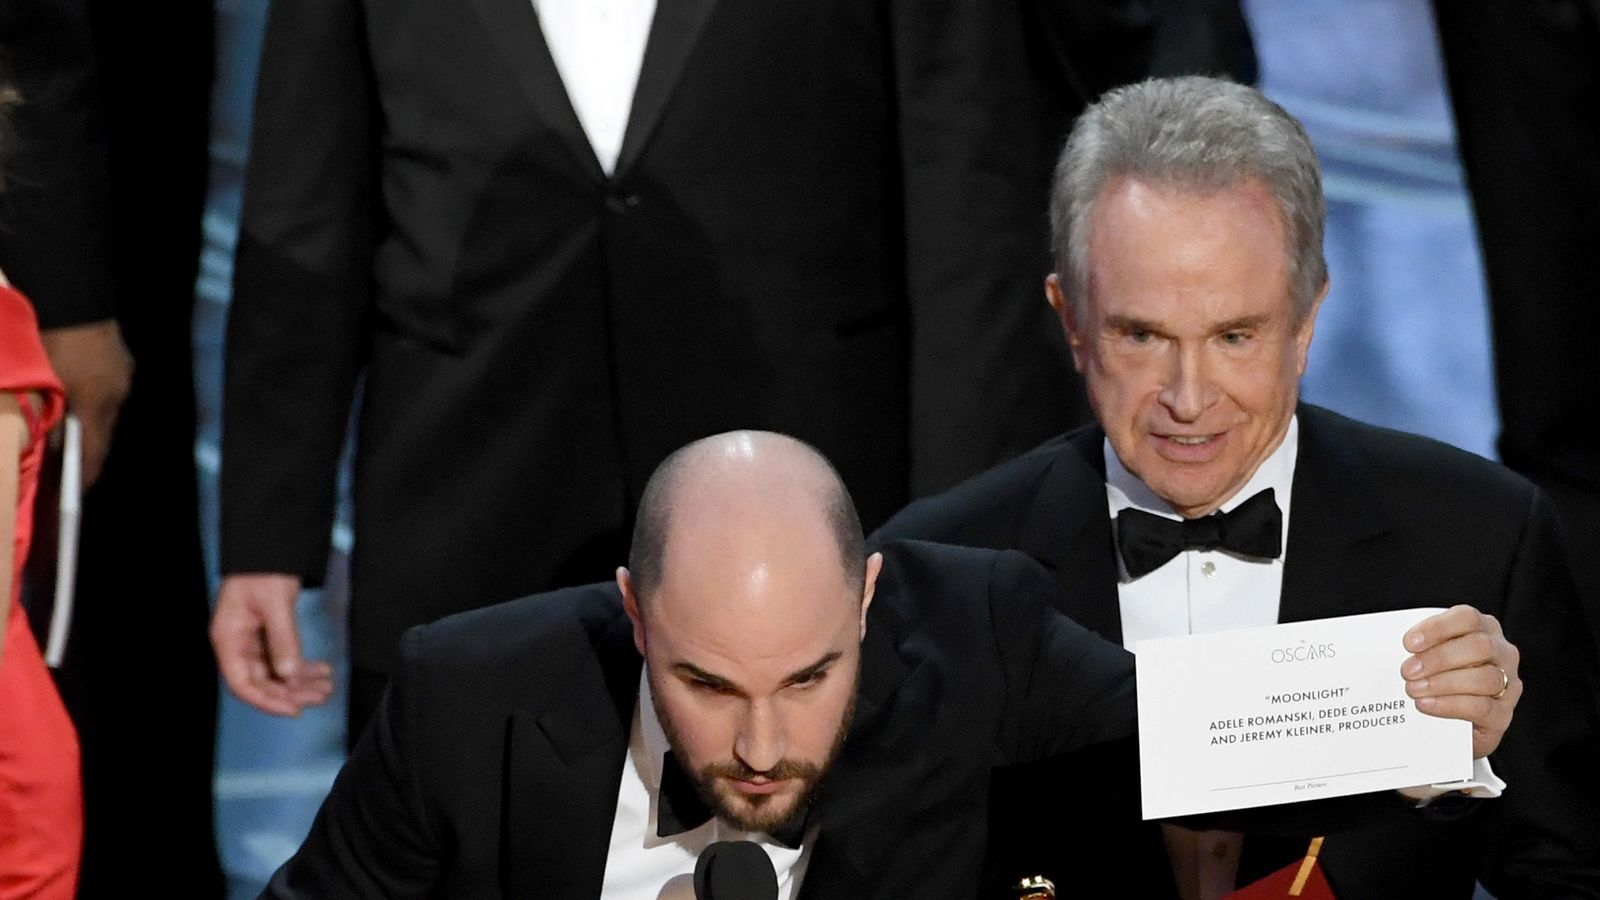 Oscars blunder sparks new rules backstage for PwC accountants Ents